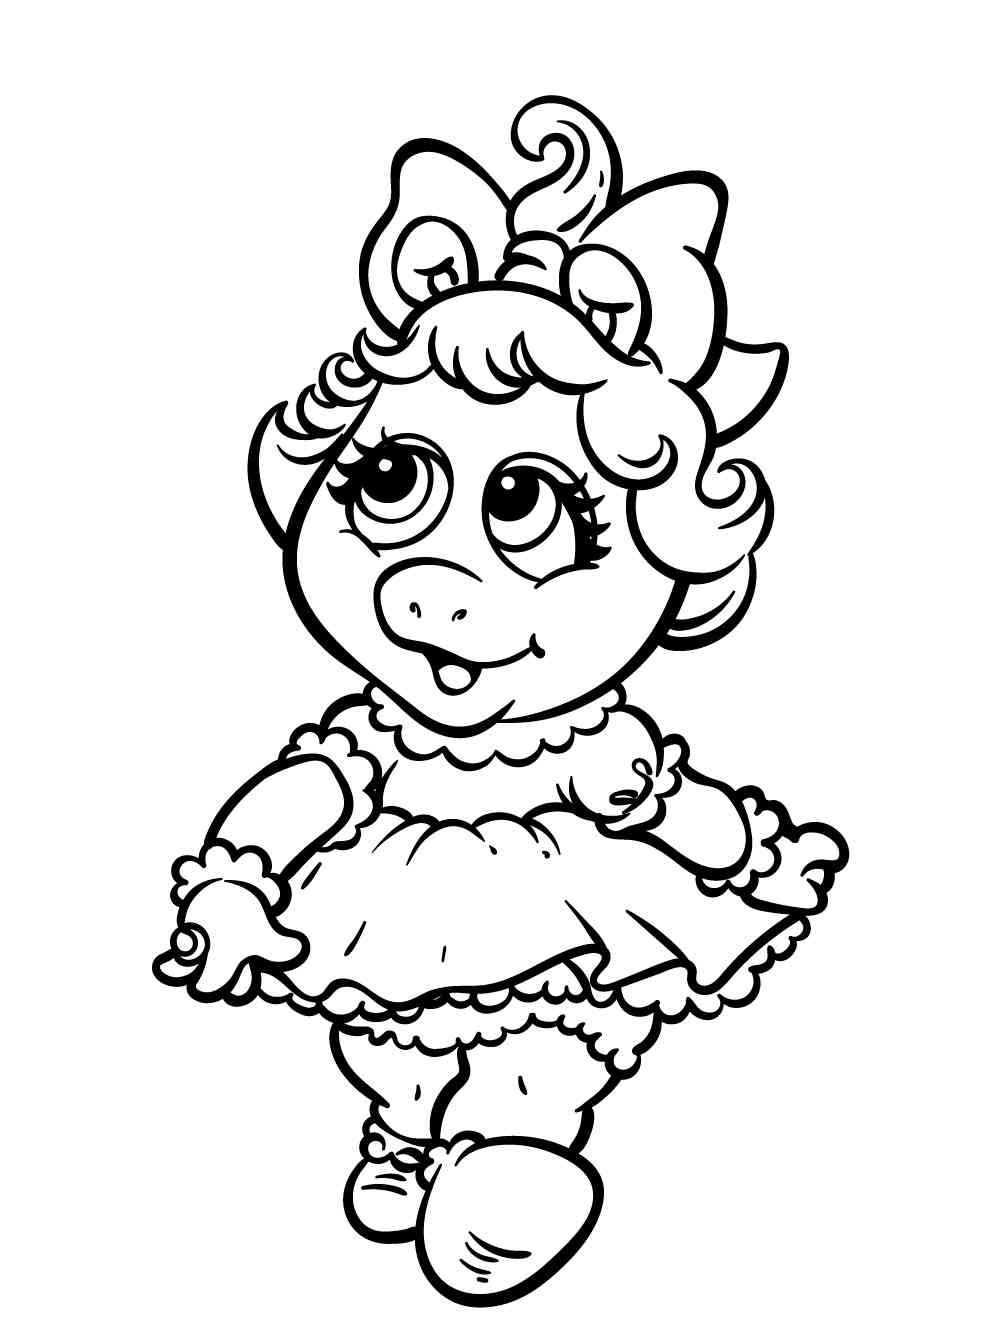 Muppet Babies coloring page - Free printable